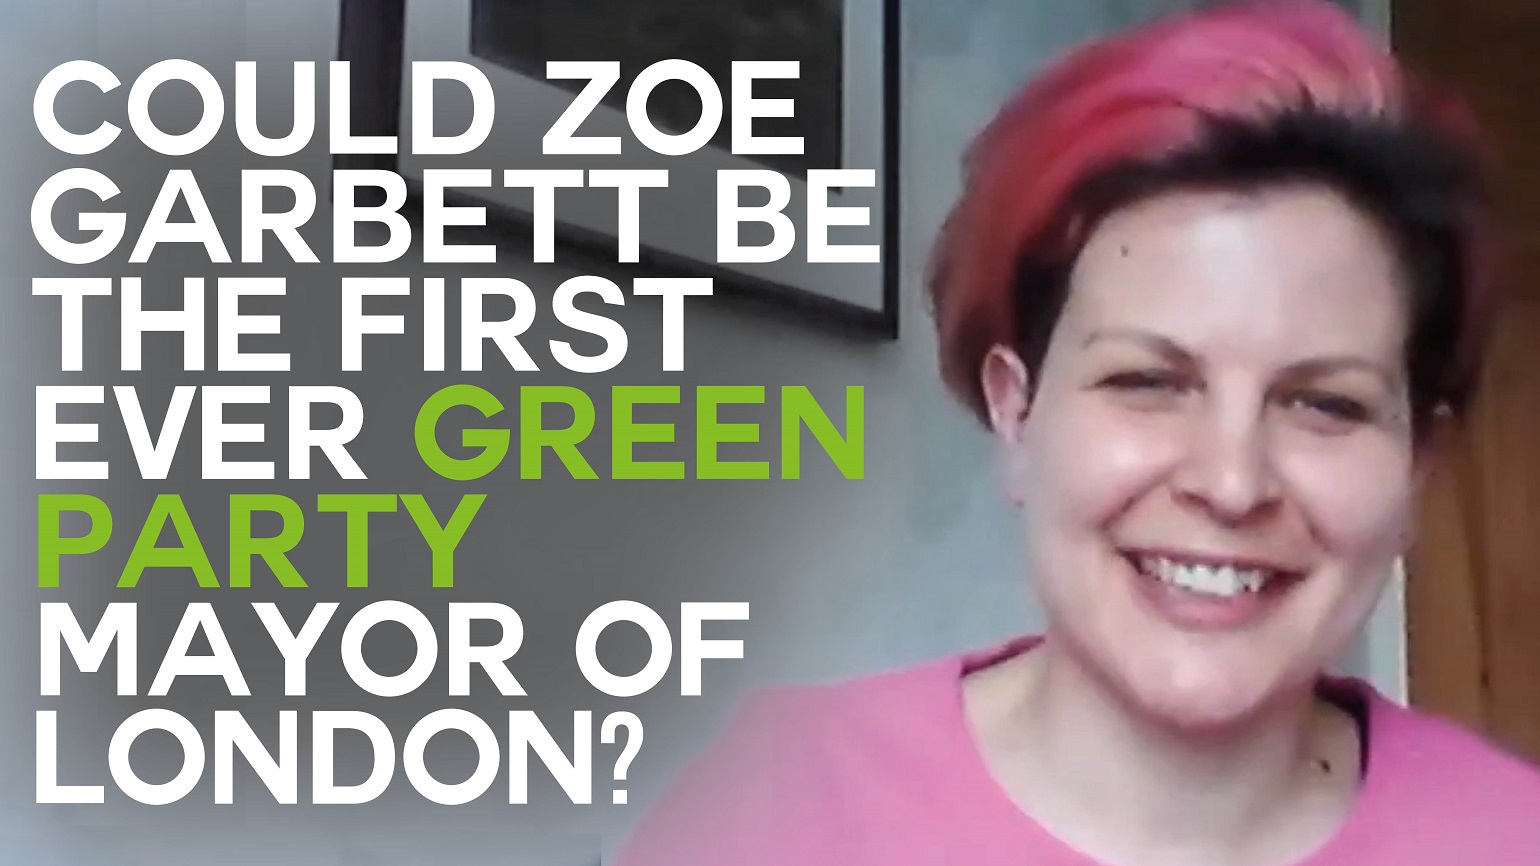 A still of an interview with Zoe Garbett with text overlaid reading "Could Zoe Garbett be the first ever Green Party Mayor of London?"